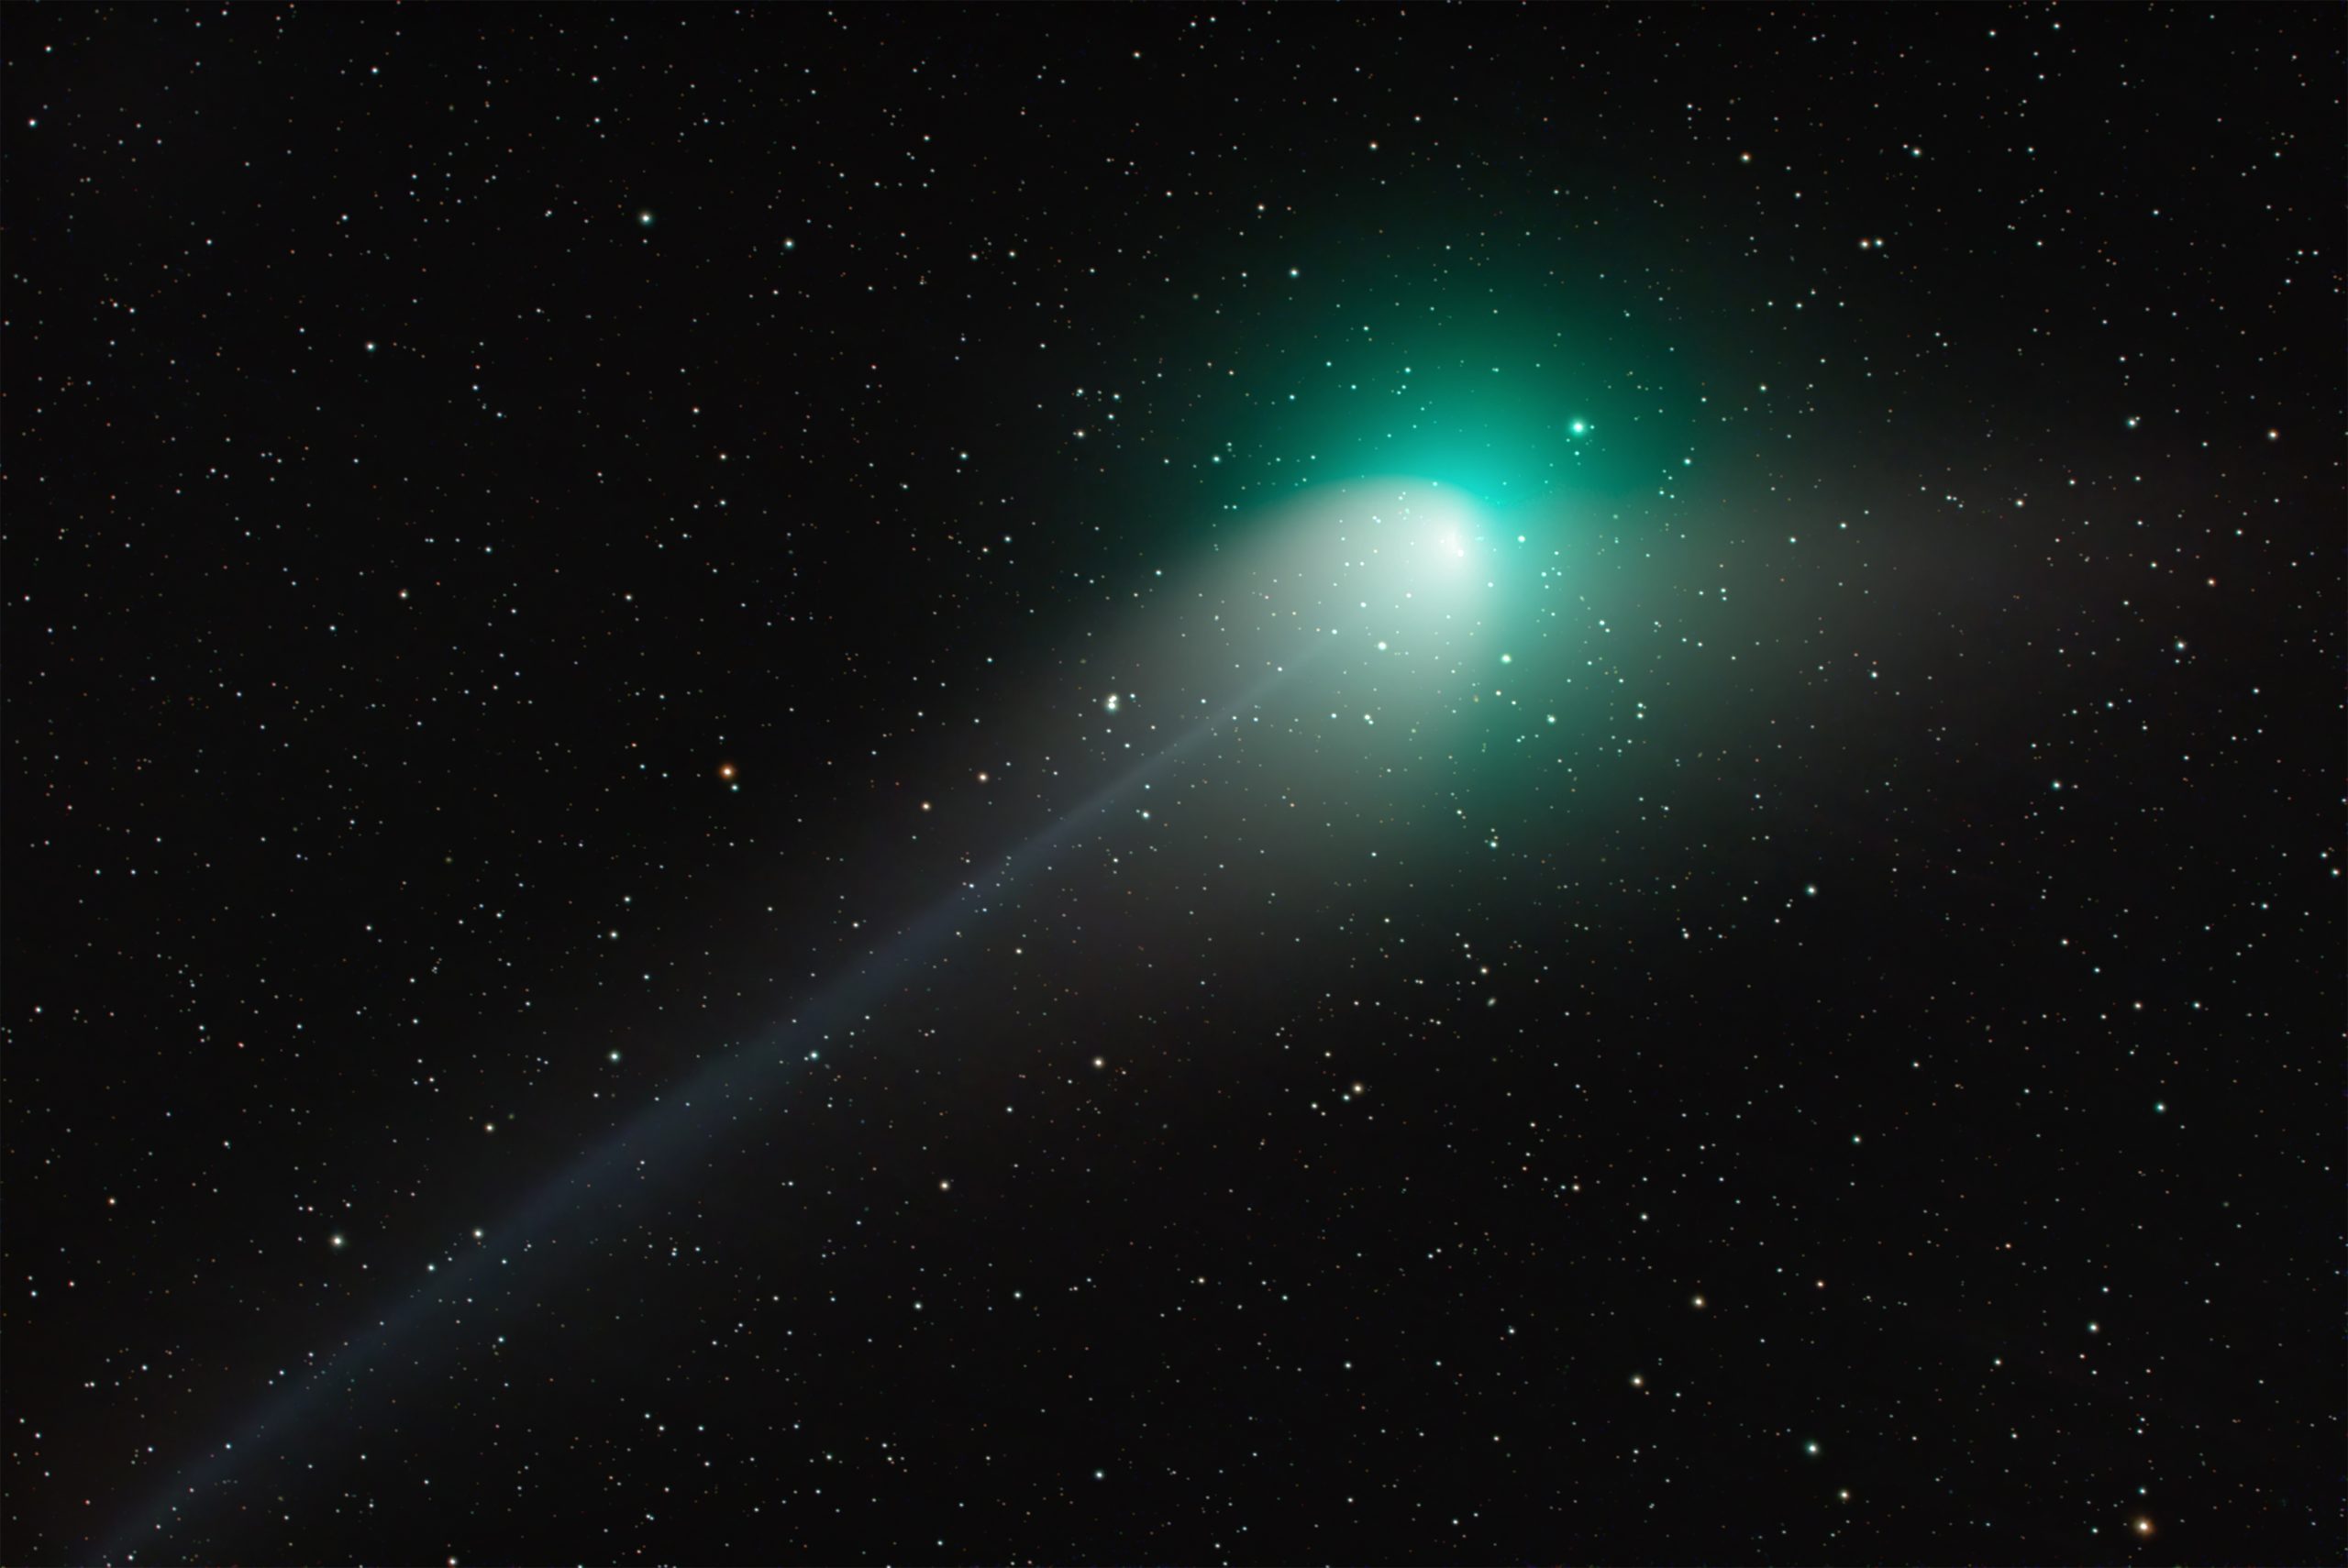 13 Questions About the Green Comet Everything You Need to Know